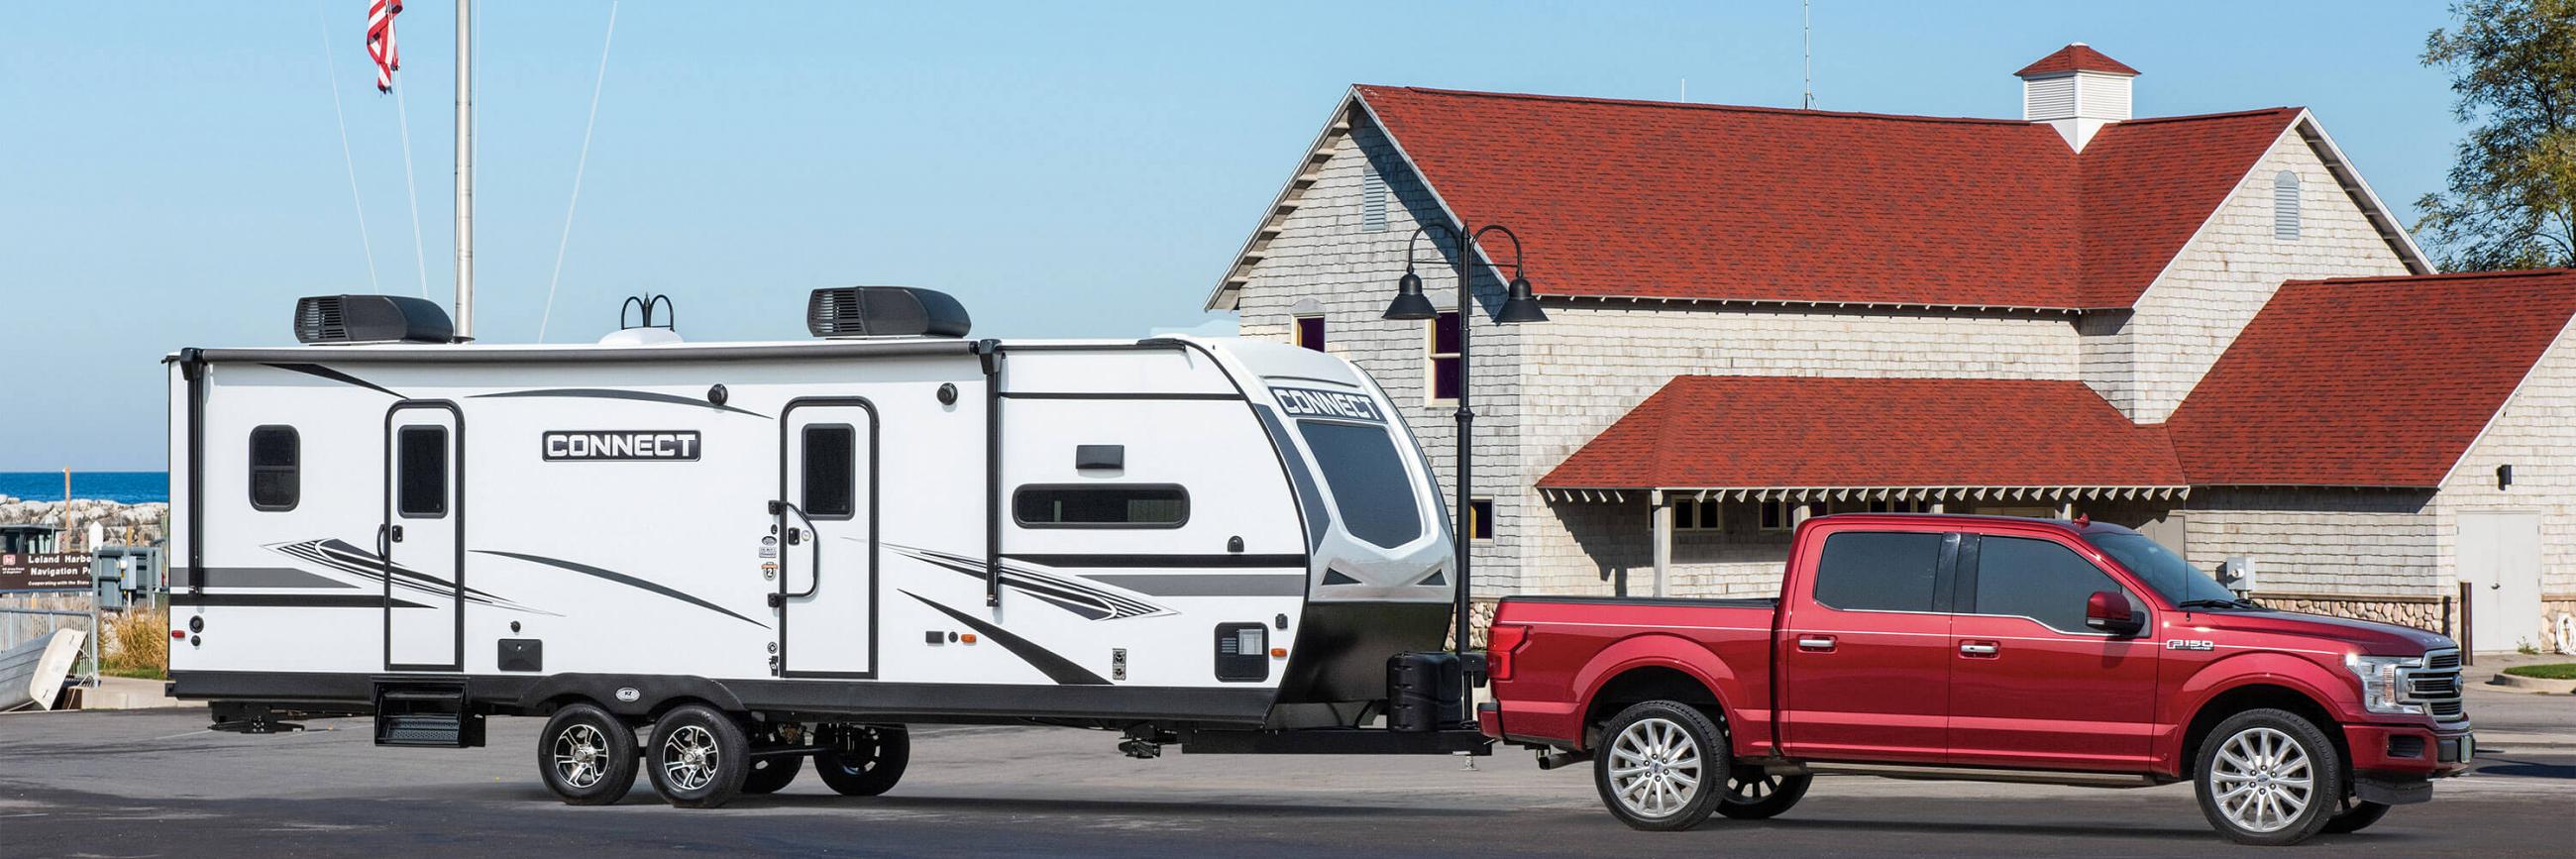 2021 KZ RV Connect C272FK Travel Trailer with Tow Vehicle at Lake